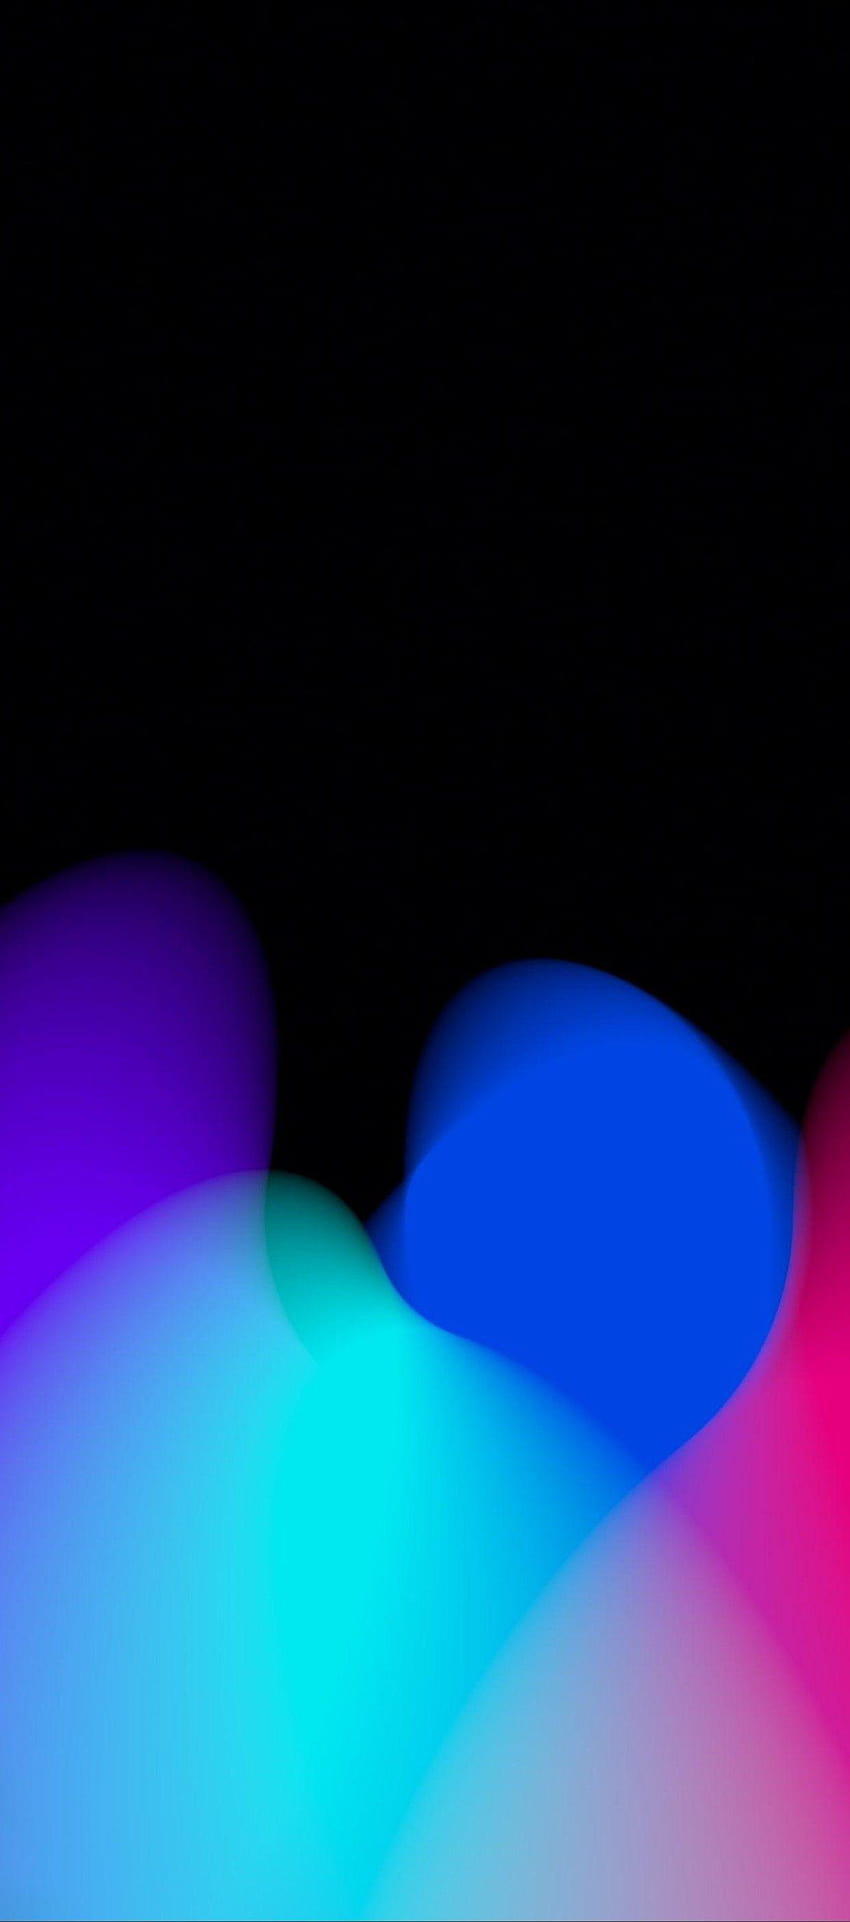 iOS 11, iPhone X, black, red, purple, blue, clean, simple, abstract, blue and red lighting HD phone wallpaper